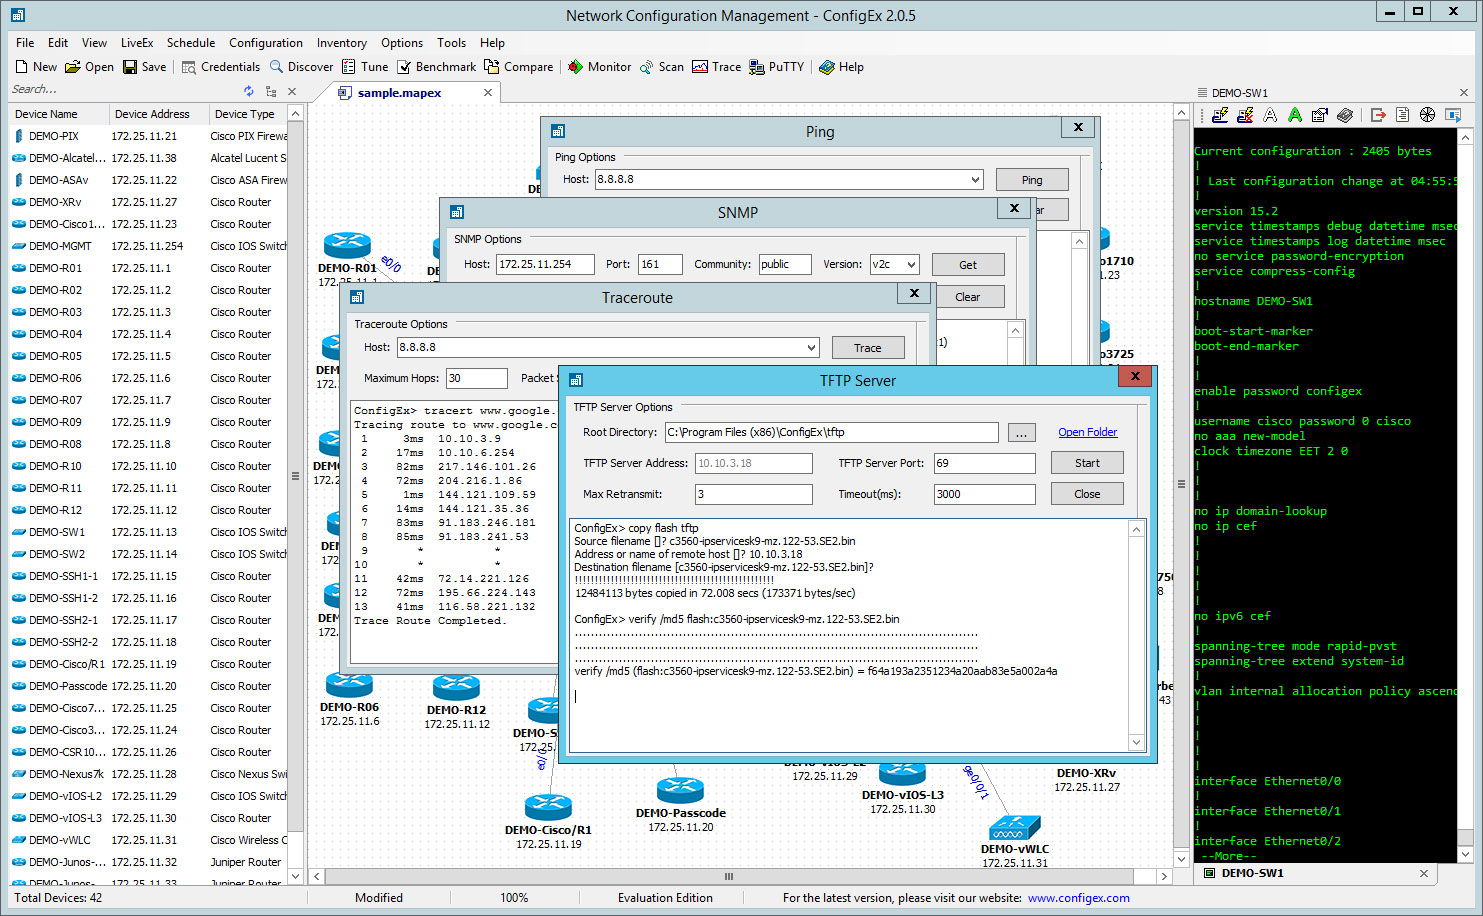 Network Configuration Manager - ConfigEx 2.0.5 full